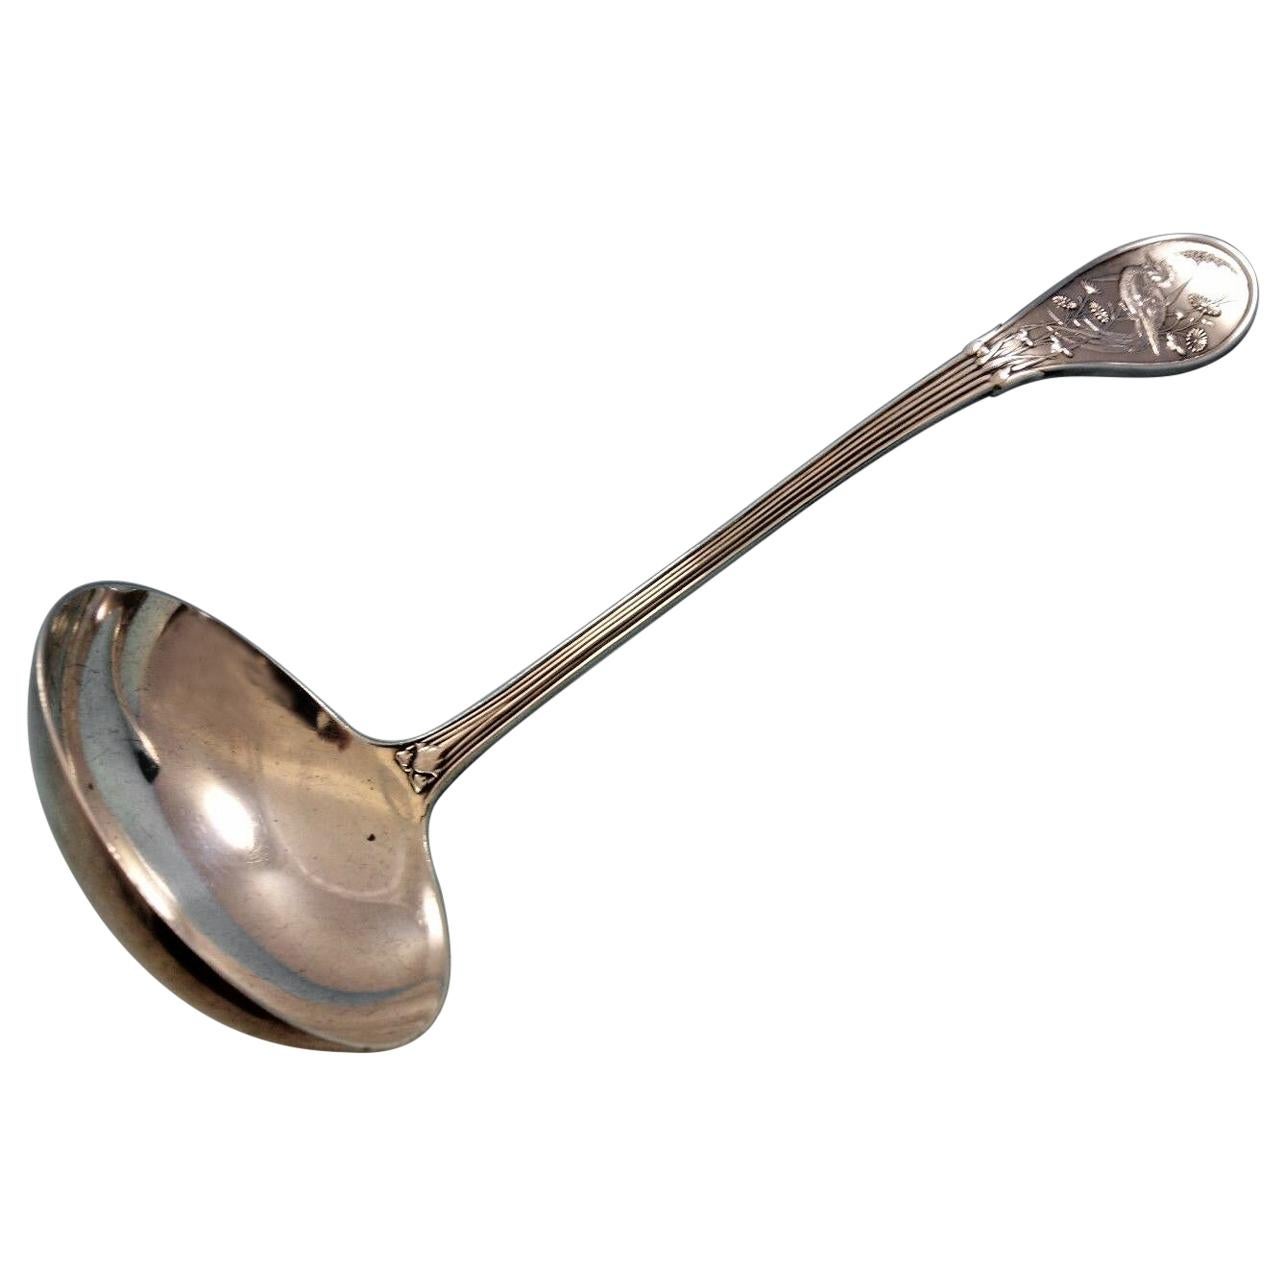 Sterling silver oyster ladle with oval bowl 10 1/2